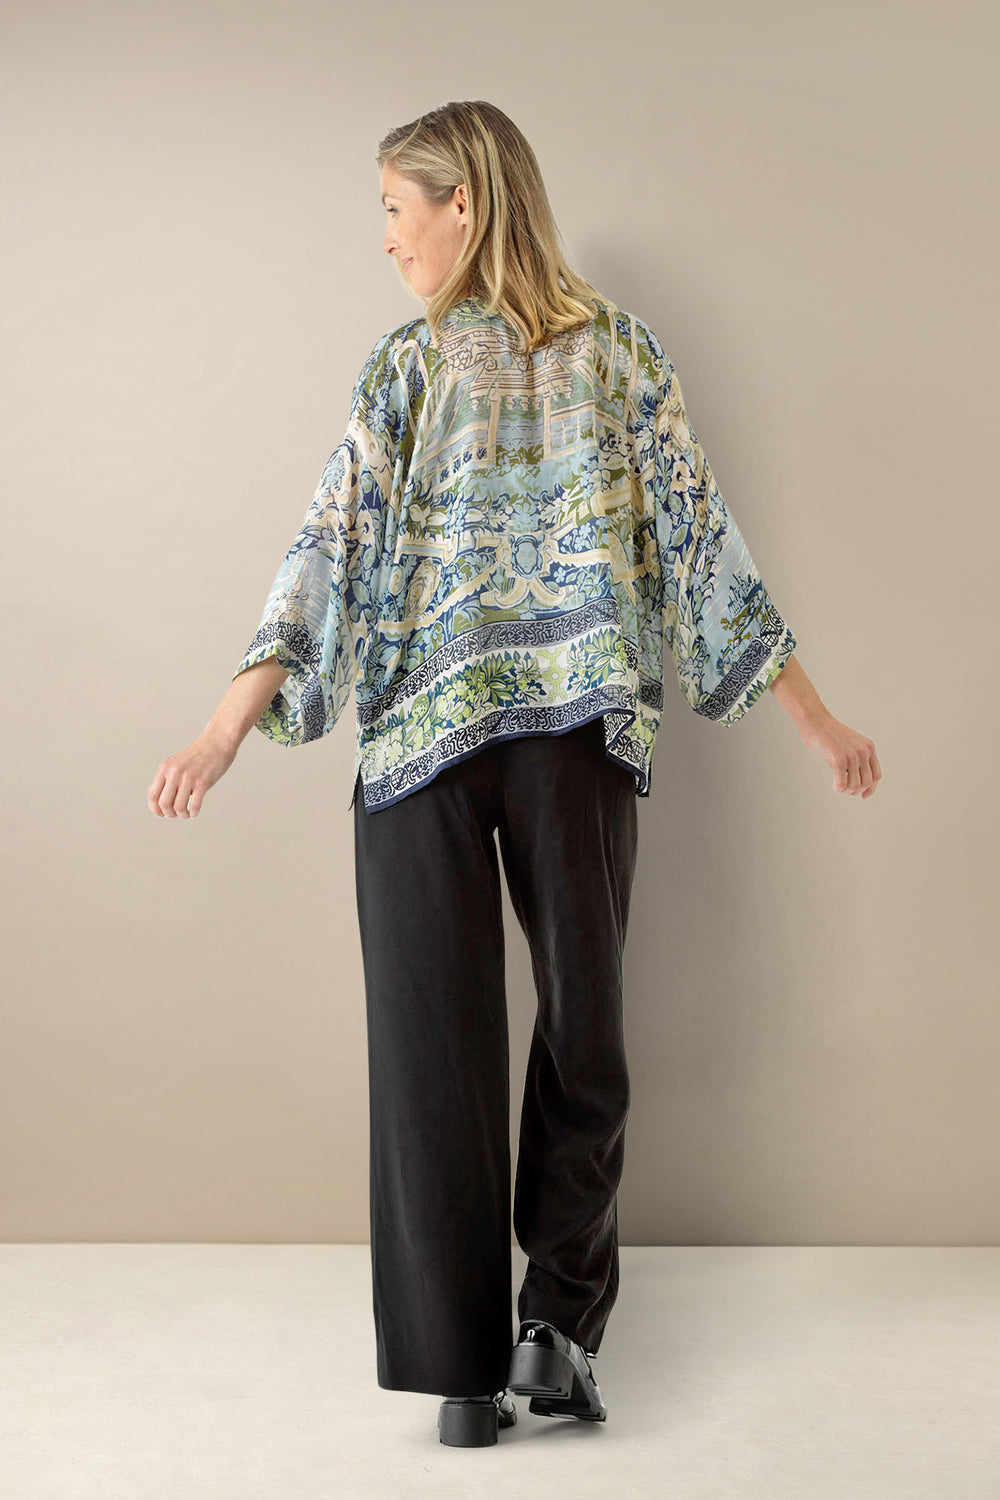 ladies short winter design kimono jacket beautiful garden scenes in sea greens and blues by One Hundred Stars